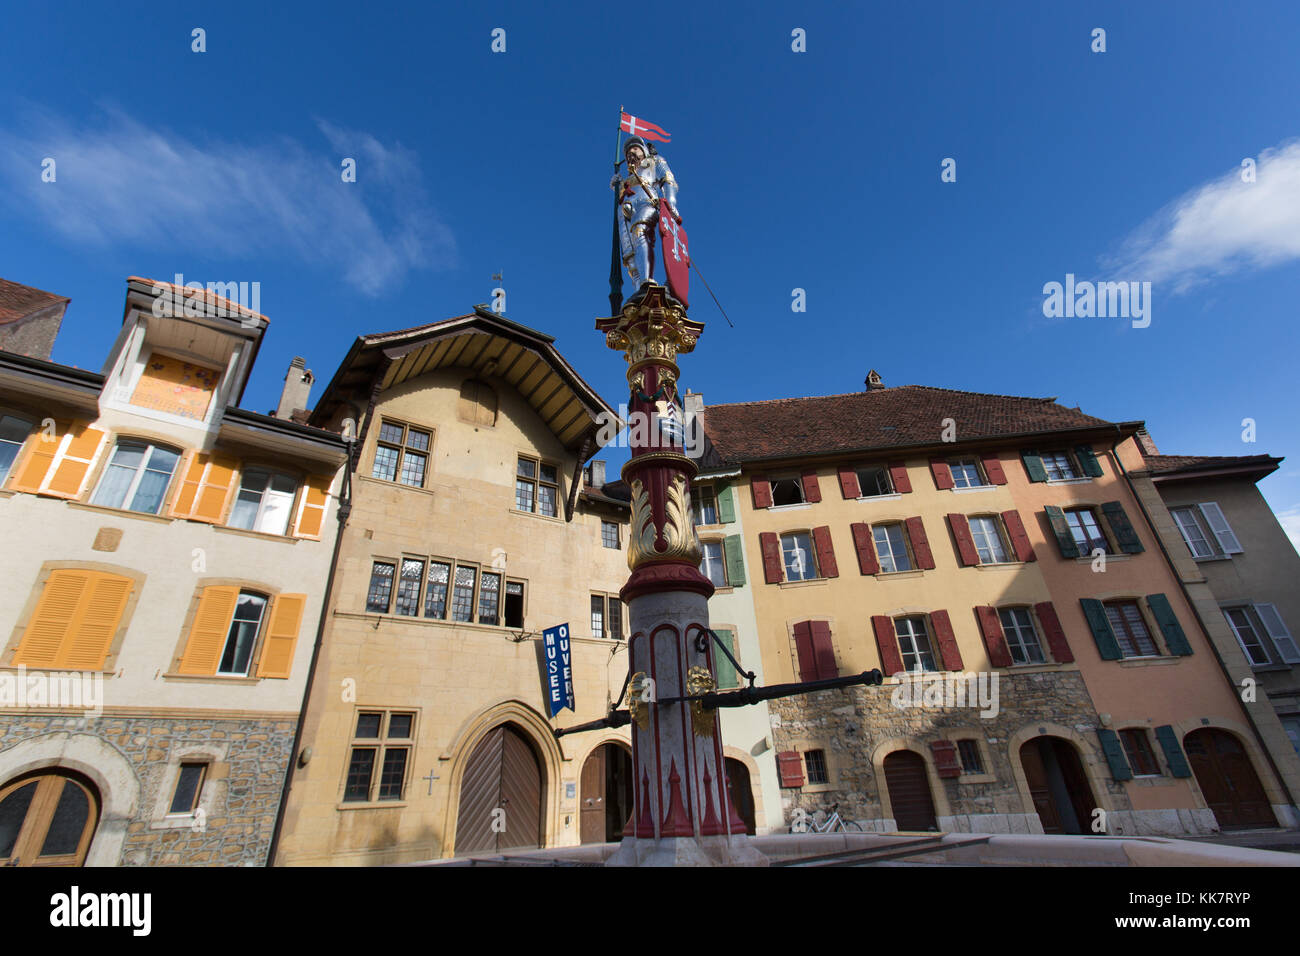 Town of Le Landeron, Switzerland. Picturesque view of the statue on top of the fountain of Saint Maurice, in the medieval Old Town of Le Landeron. Stock Photo